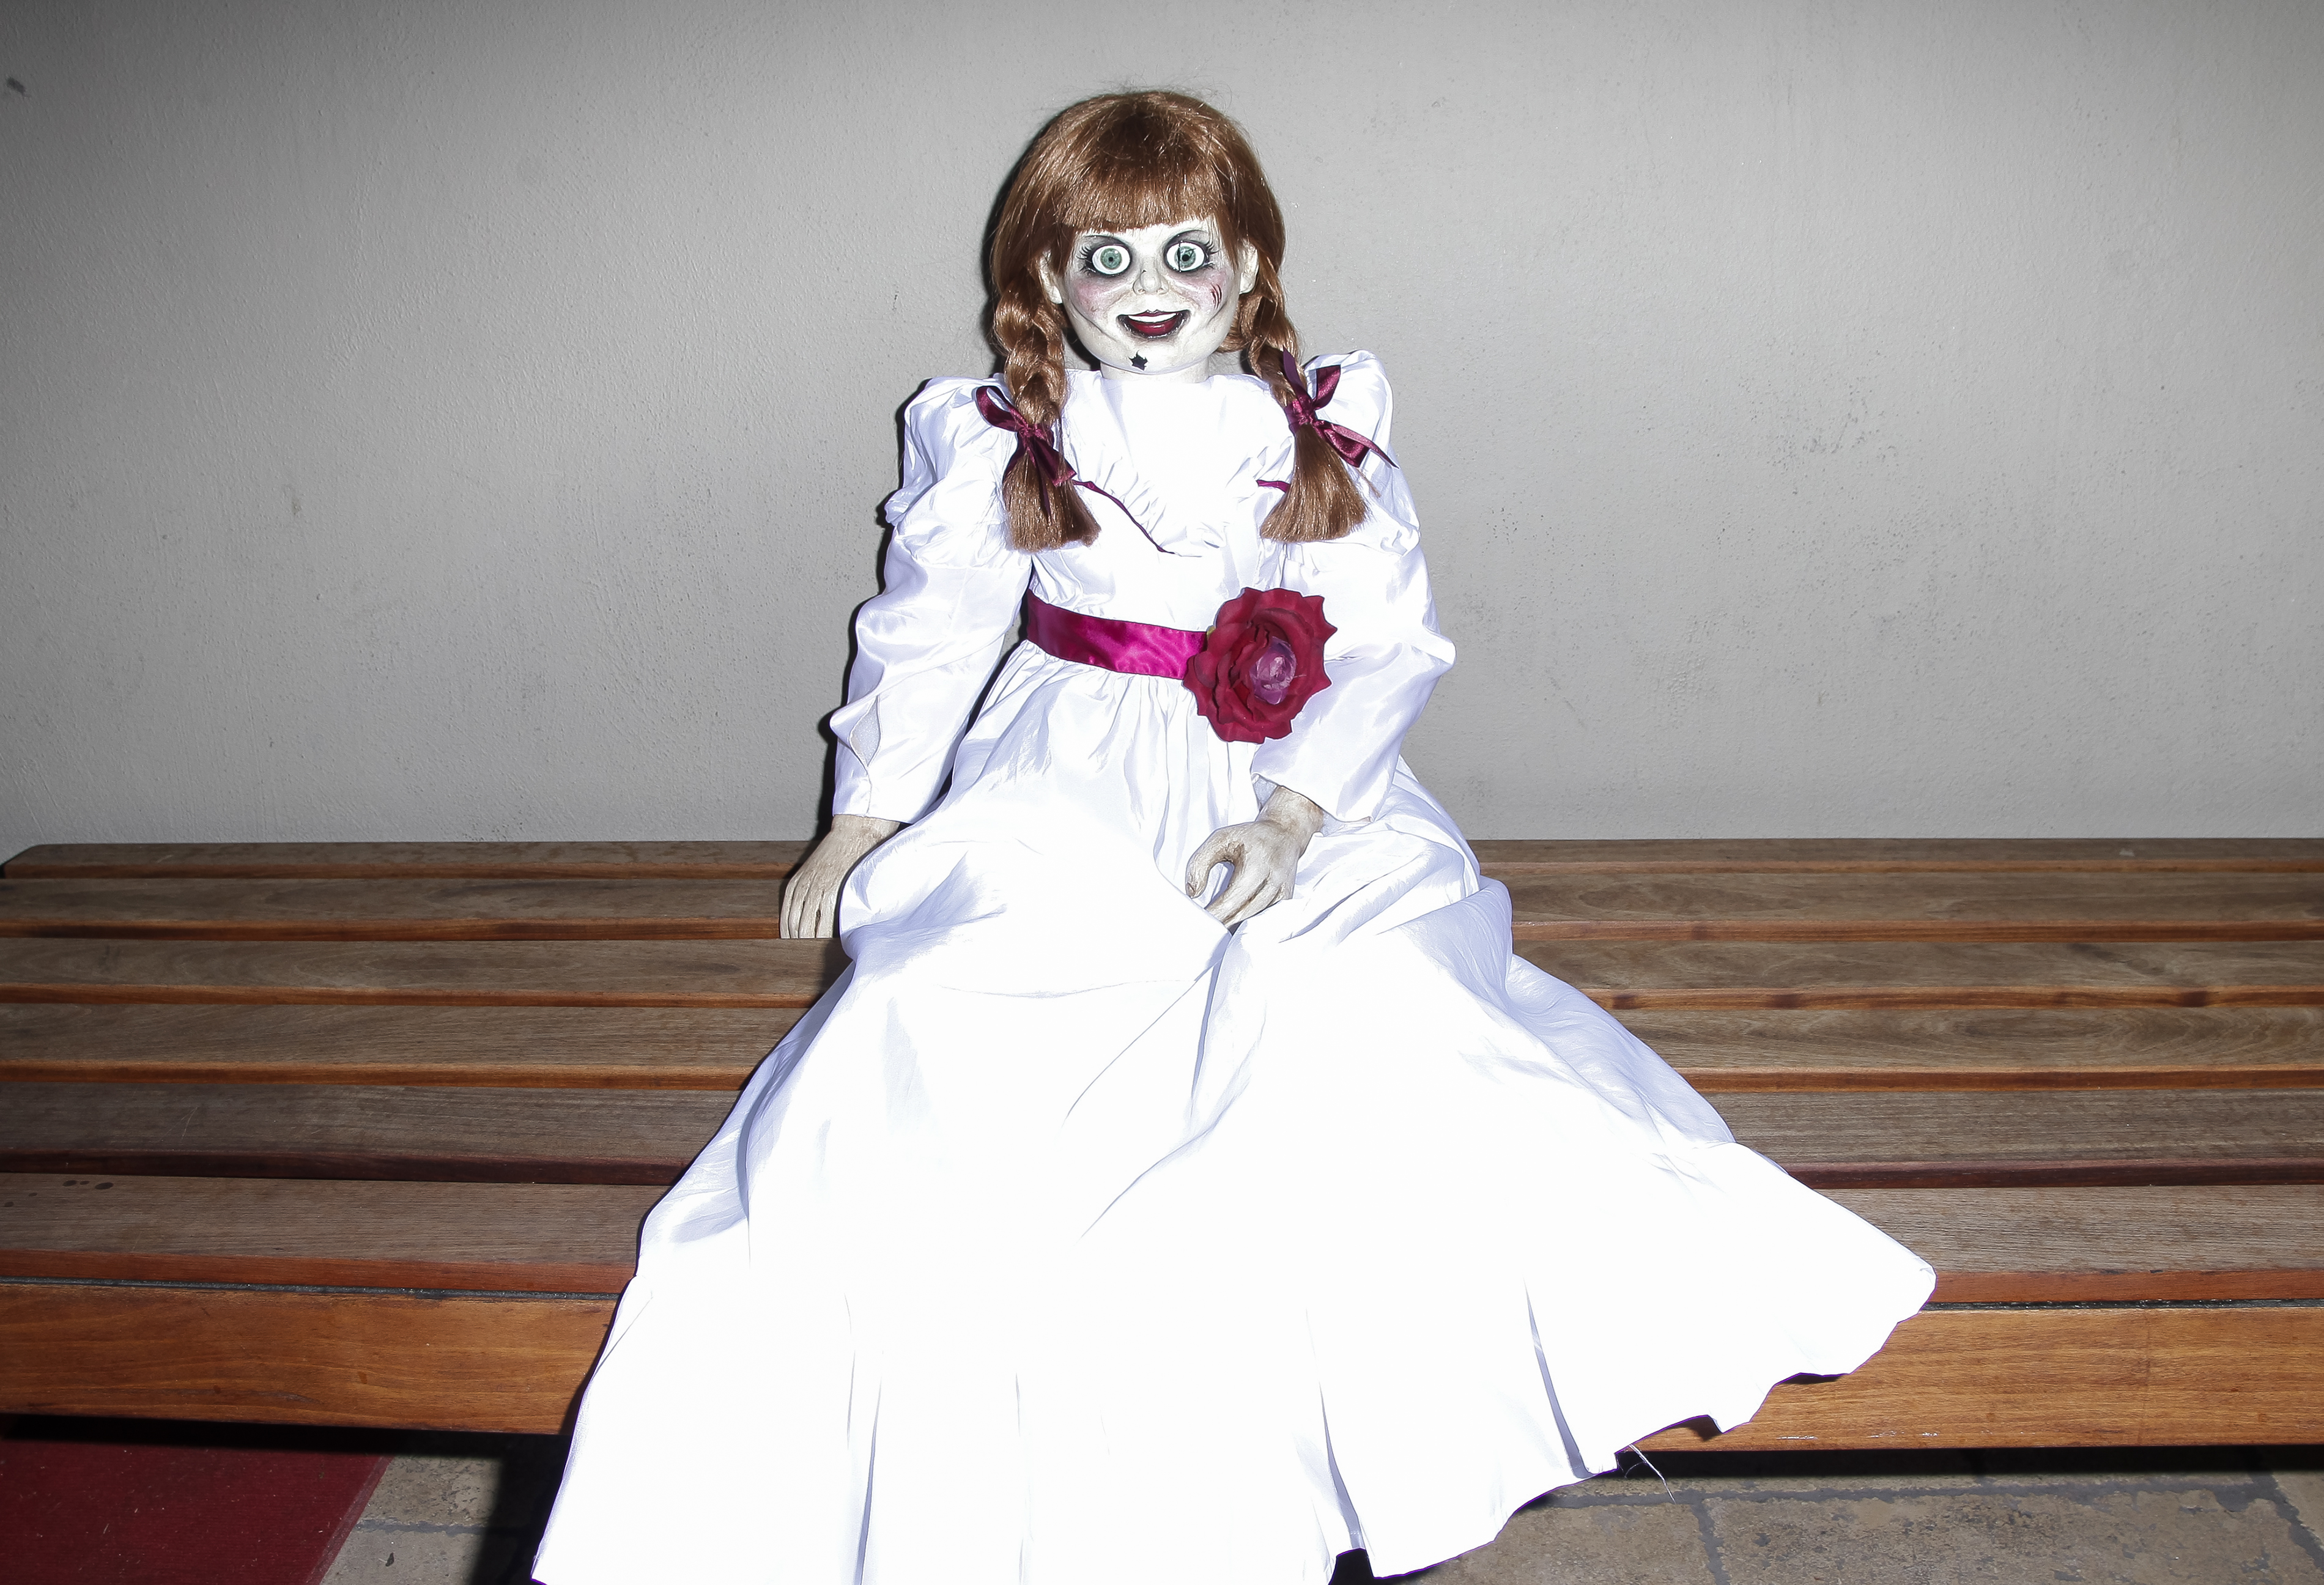 Annabelle doll to appear at Connecticut Casino – KIRO 7 News Seattle